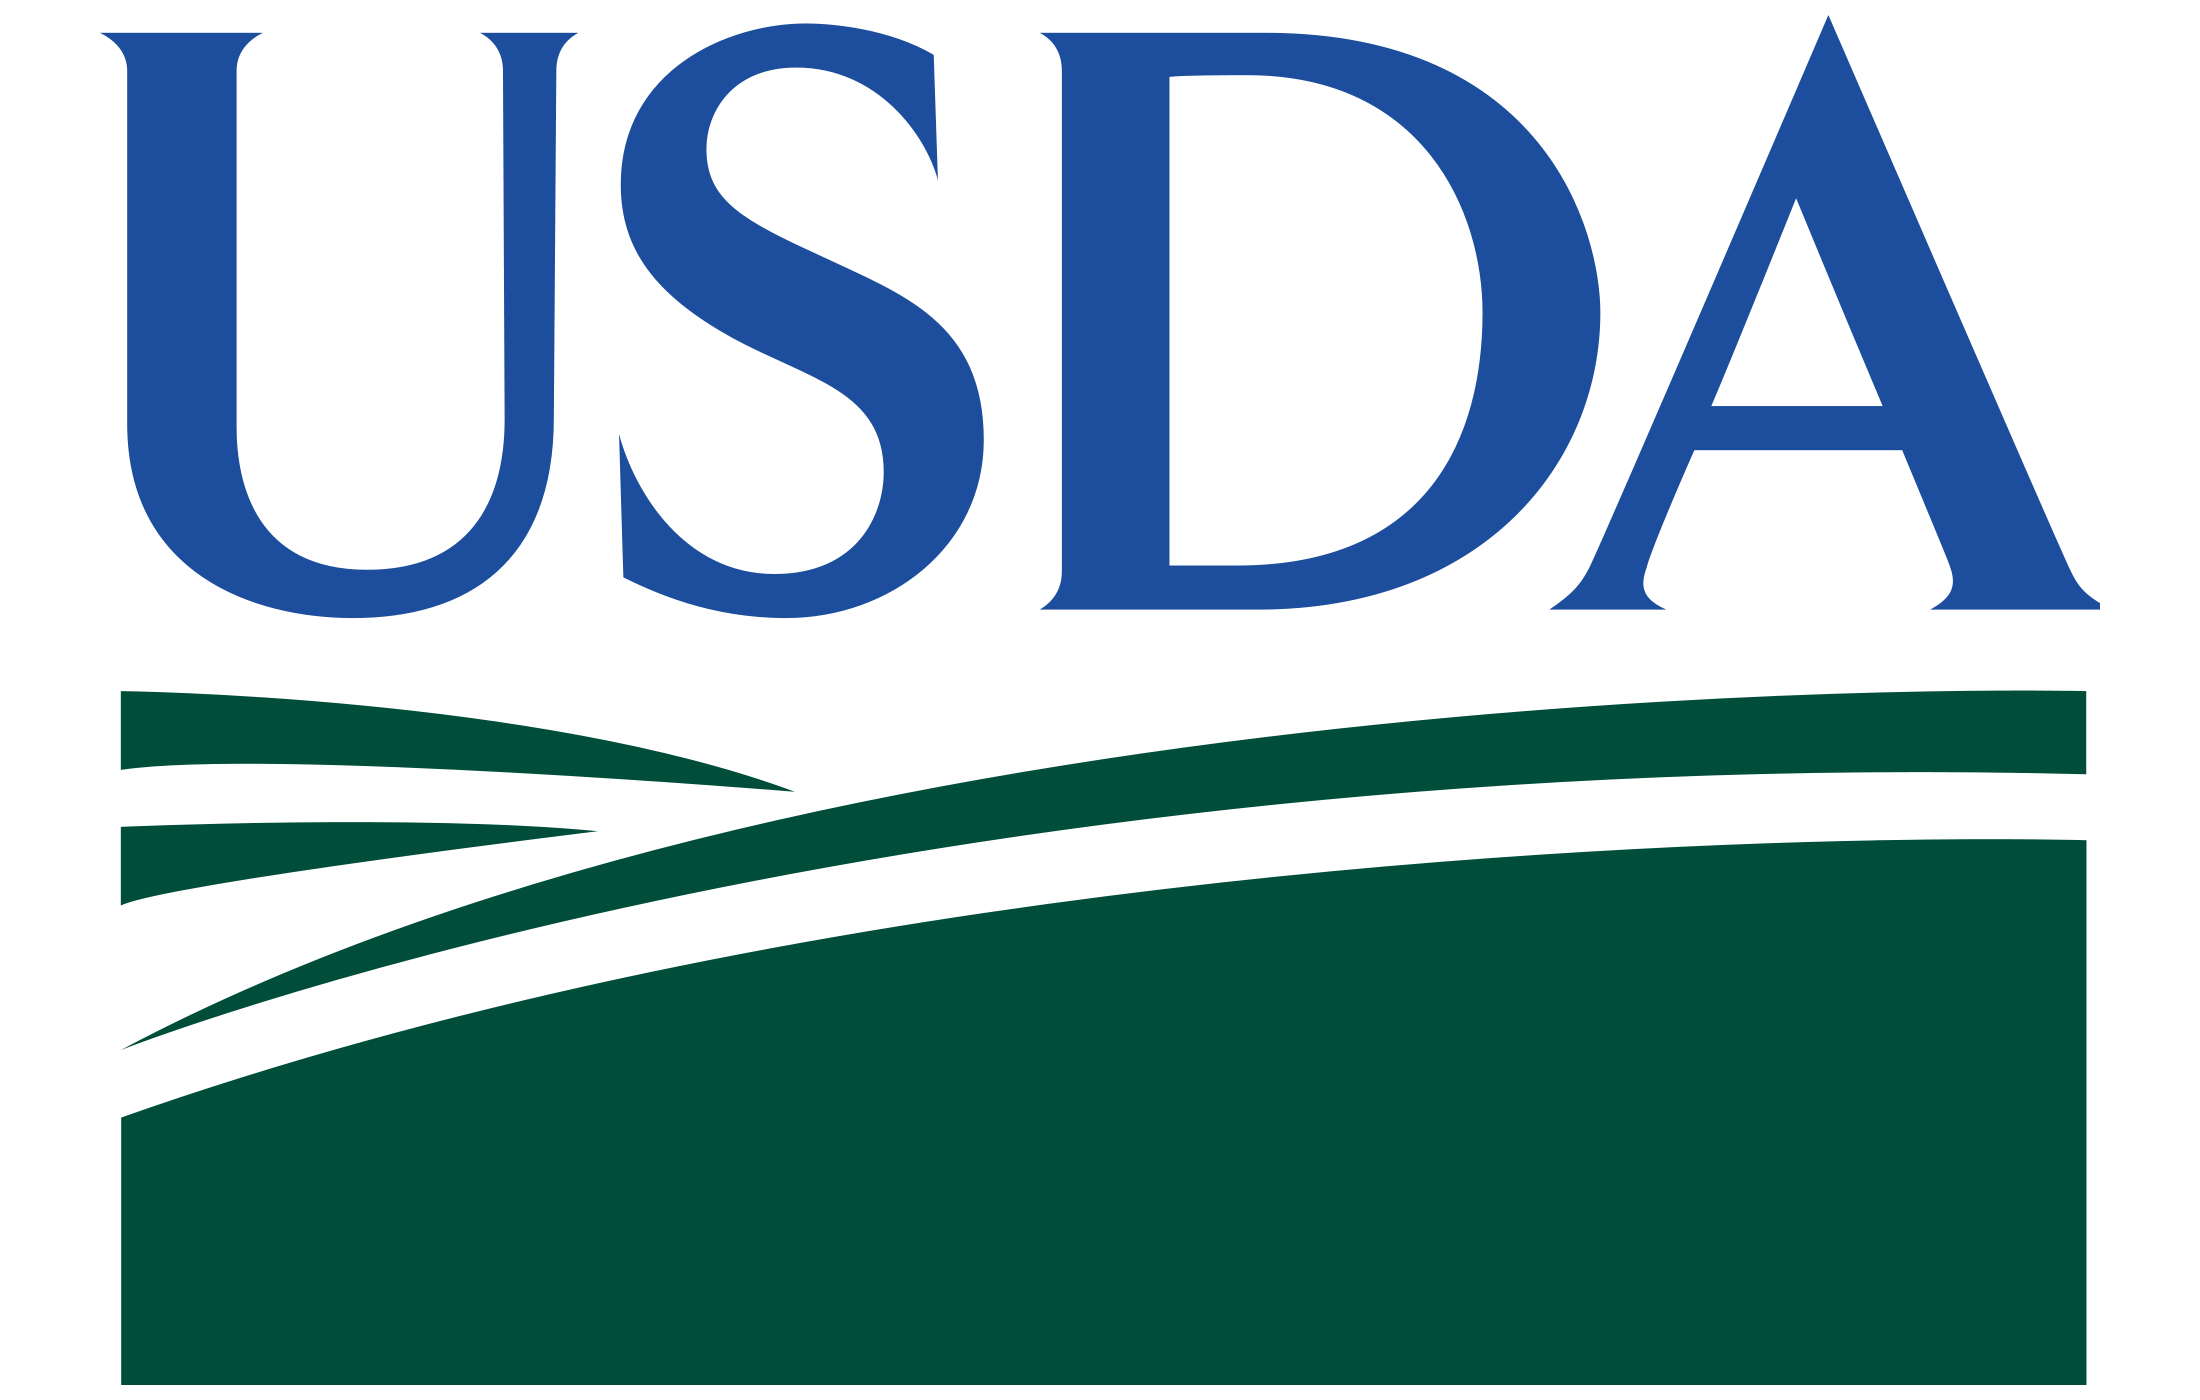 US department of agriculture logo